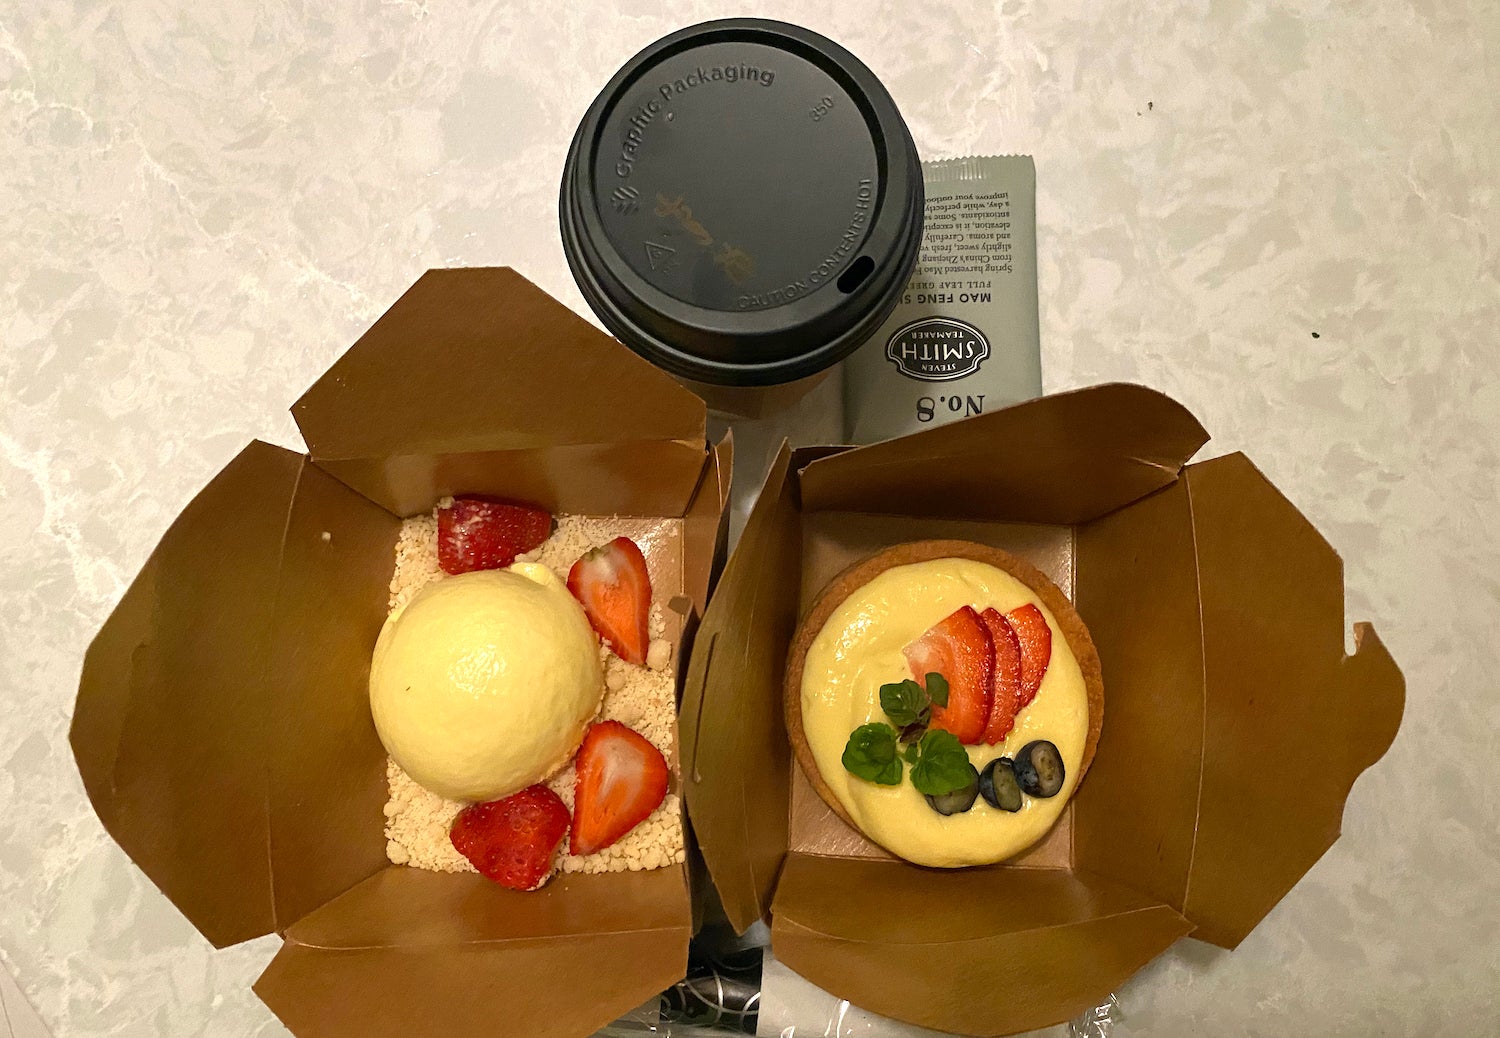 Pana cotta and lime tart in a paper container